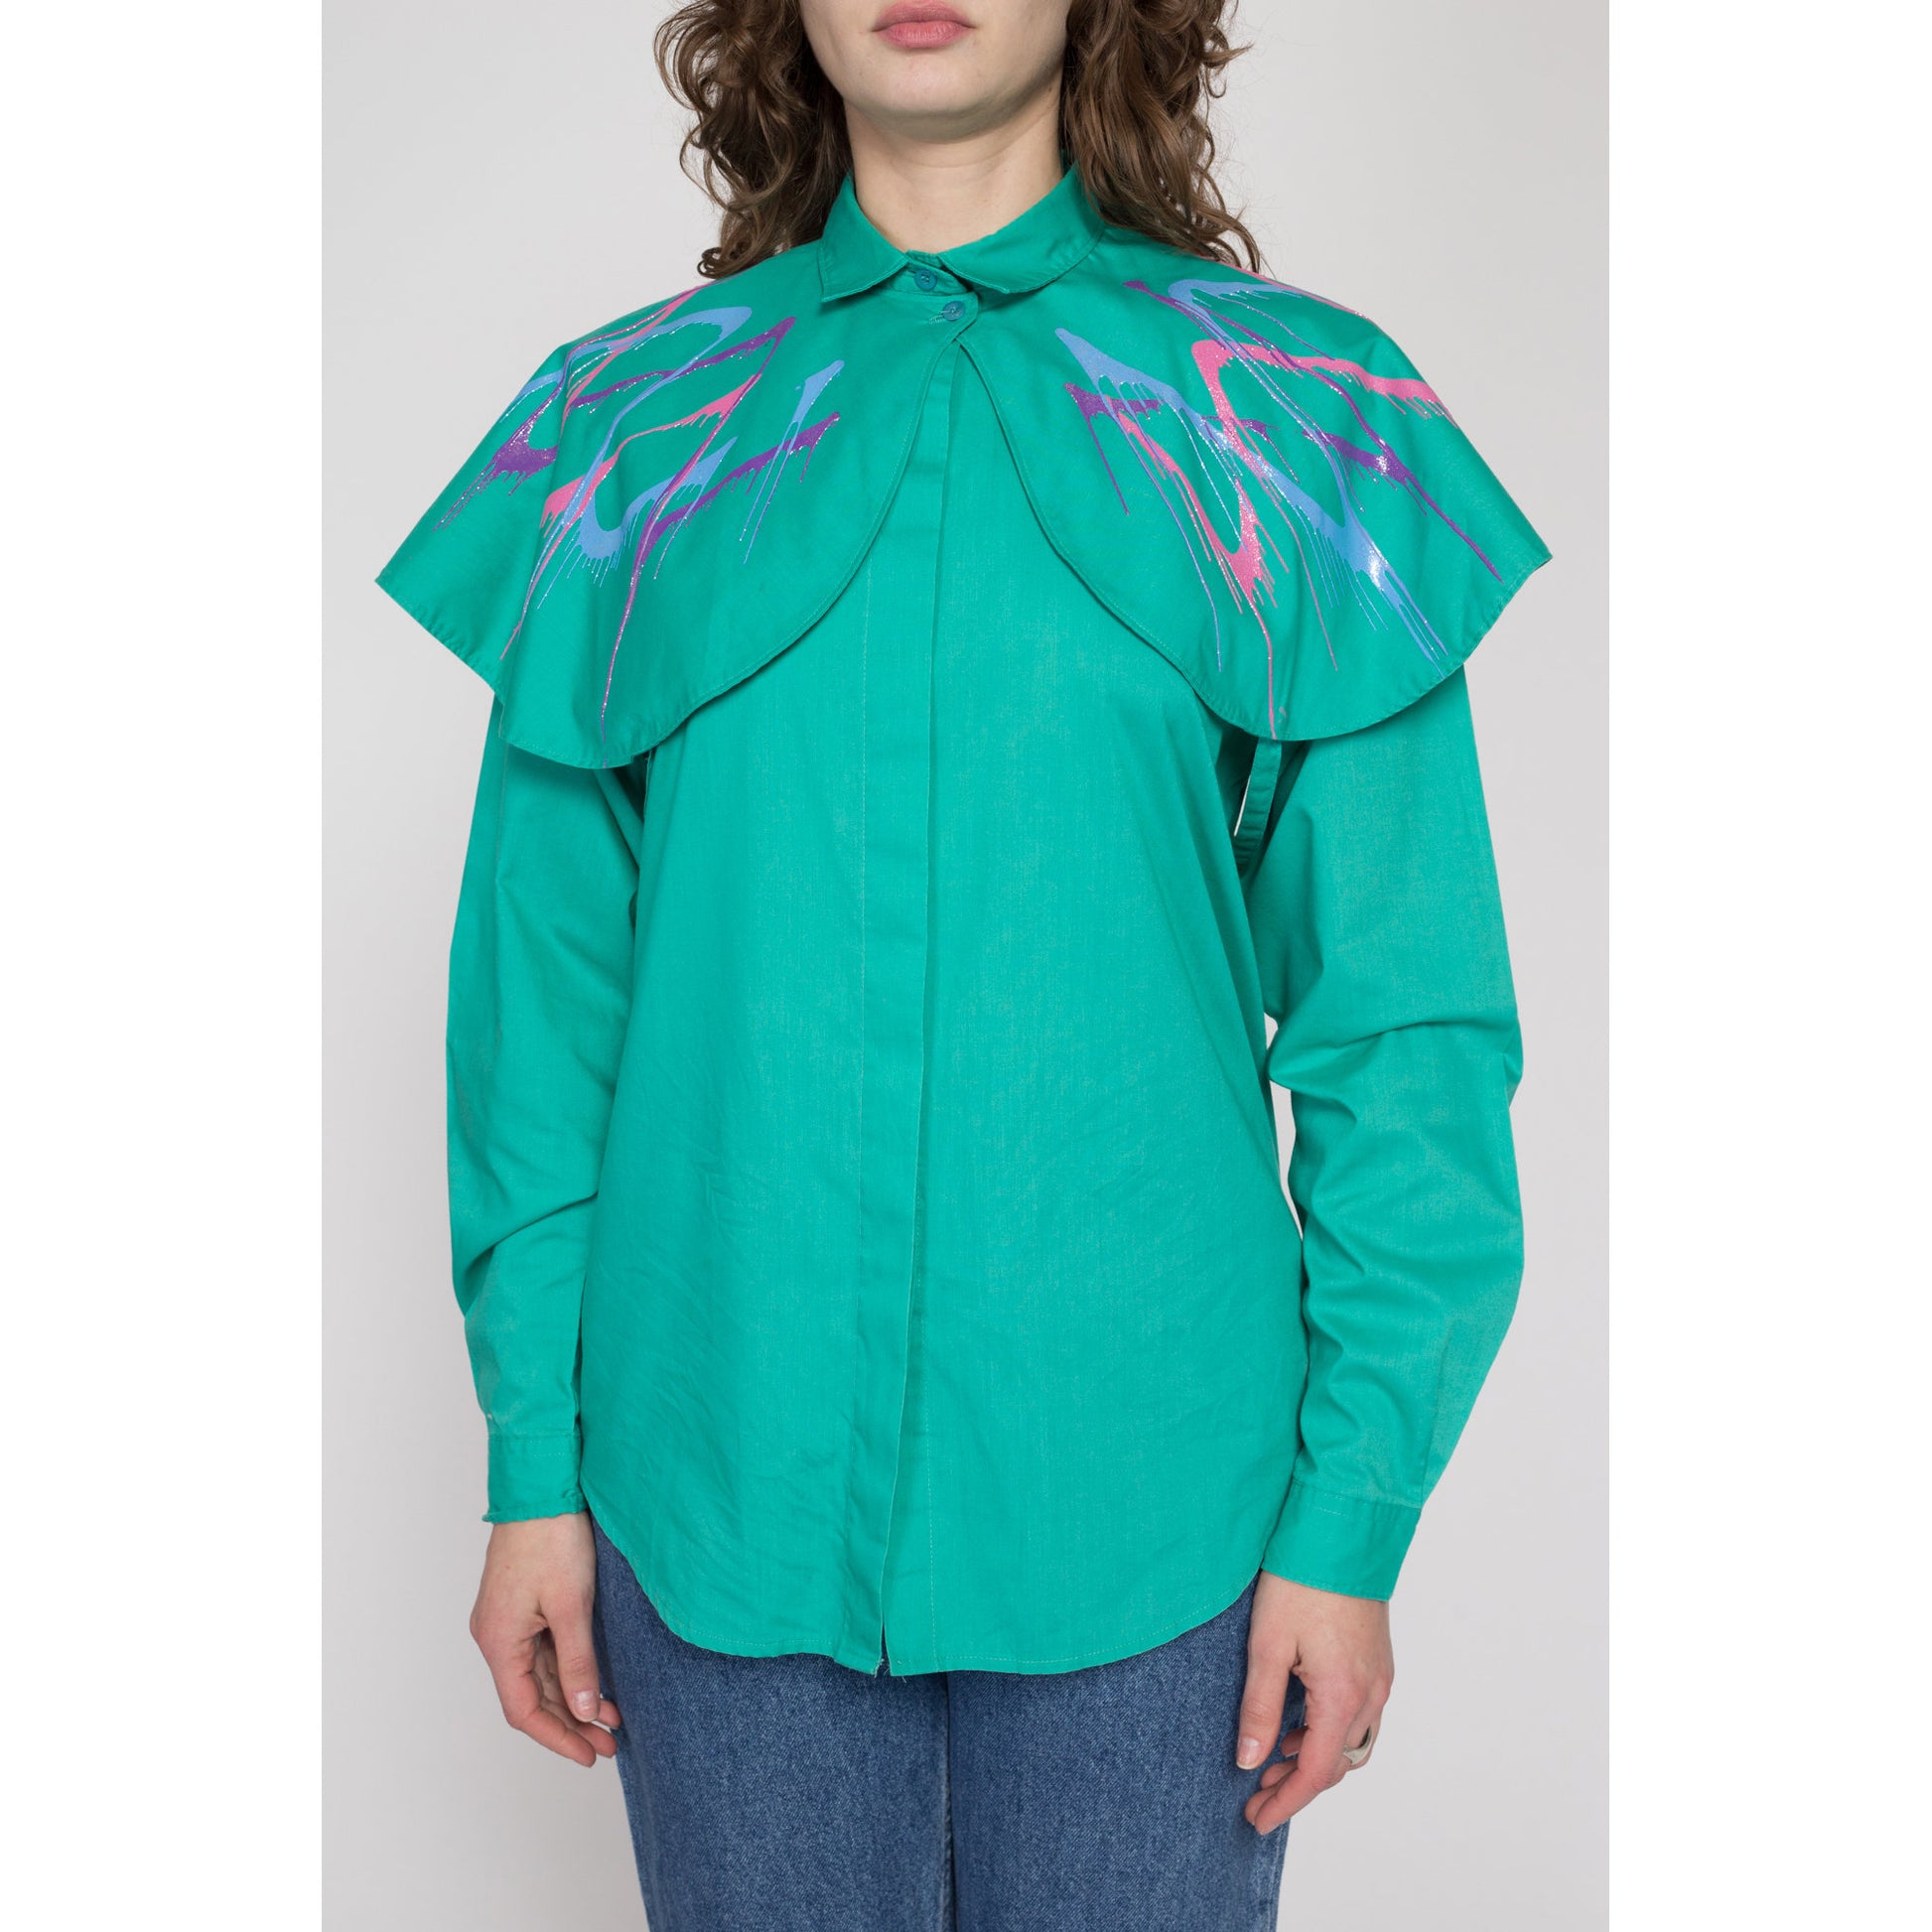 Medium 80s Teal Cameo Rose Western Capelet Shirt | Vintage Paint Splatter Graphic Collared Cape Top